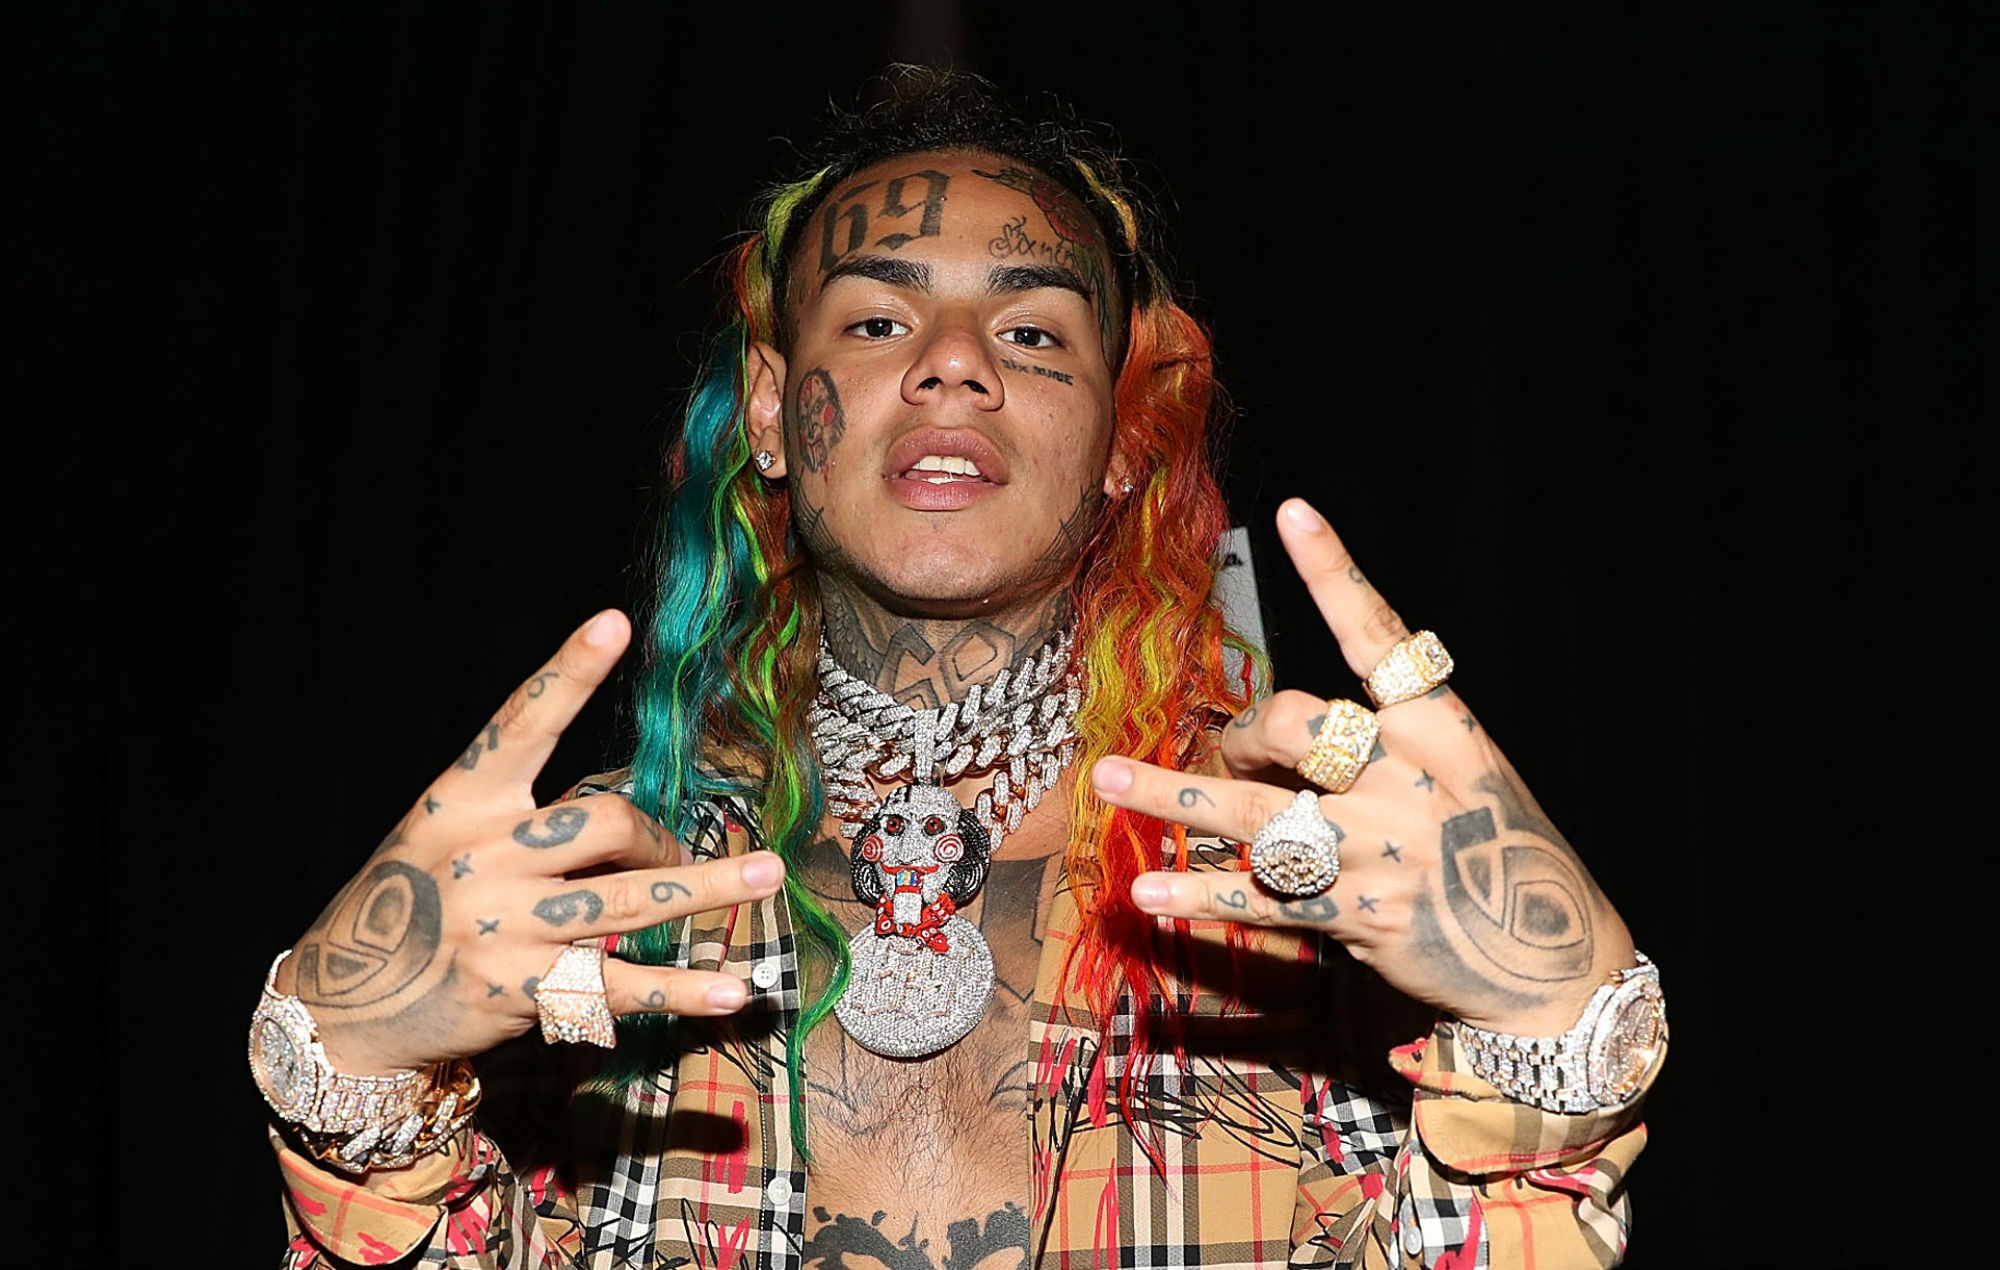 6ix9ine Says He’s Surprised He Hasn’t Died Yet After Snitching Ordeal…